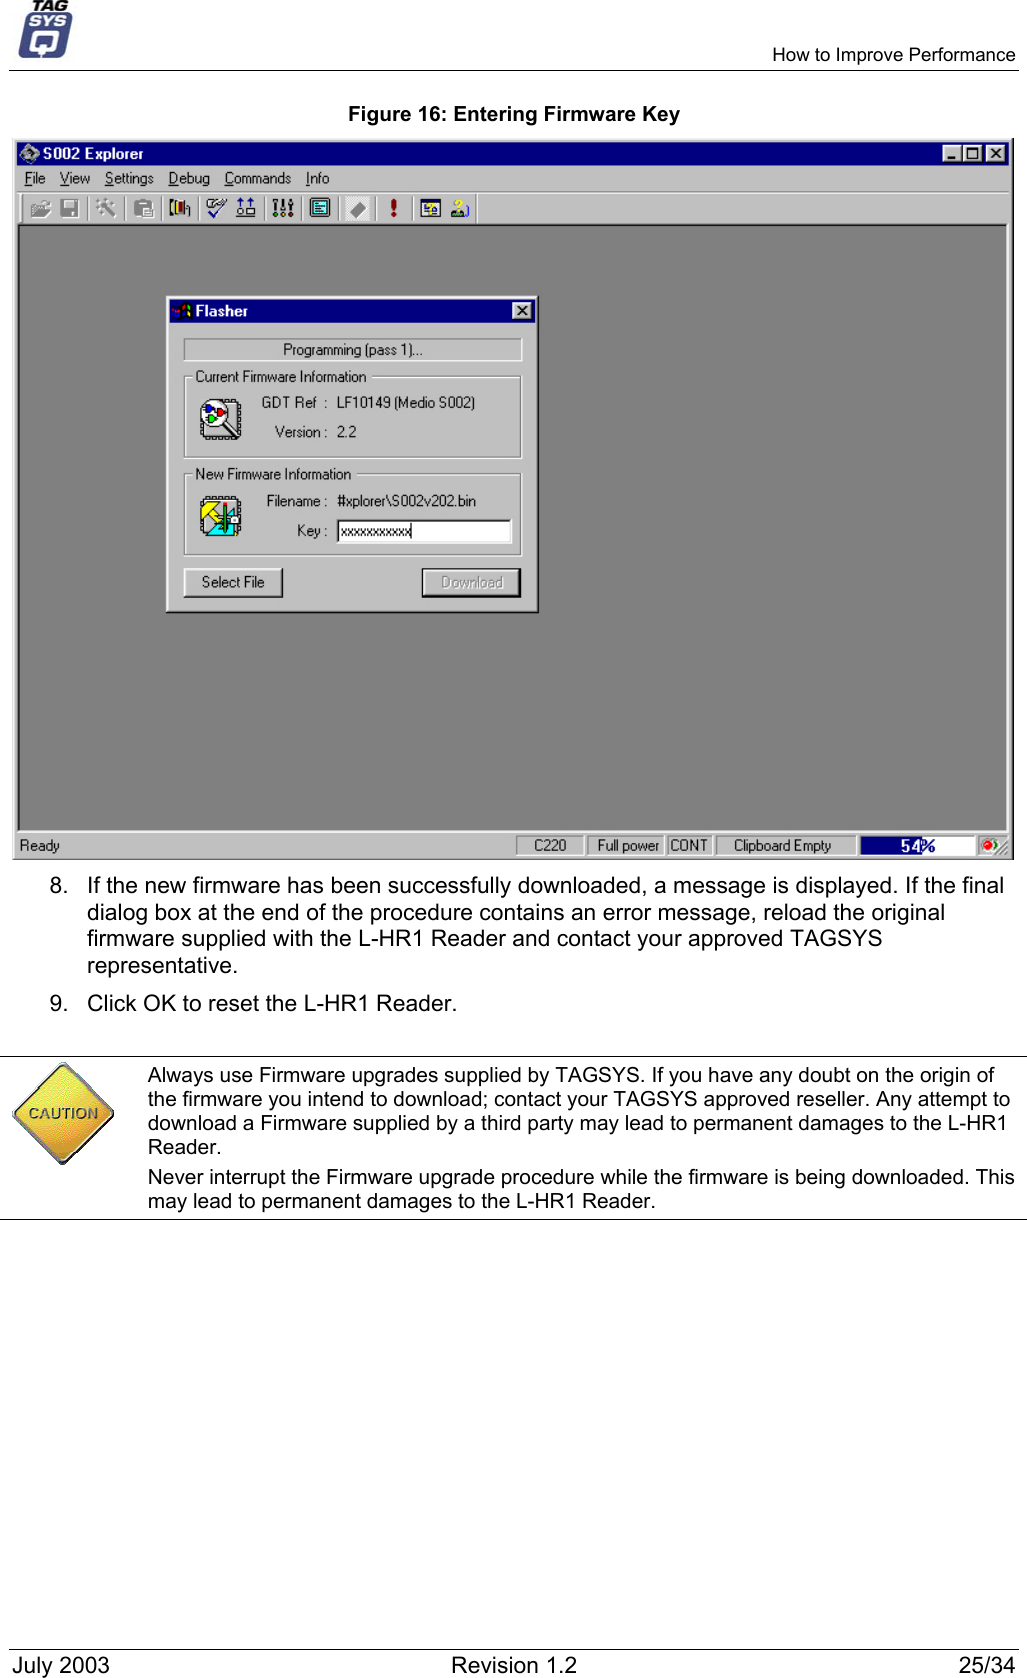     How to Improve Performance Figure 16: Entering Firmware Key   8.  If the new firmware has been successfully downloaded, a message is displayed. If the final dialog box at the end of the procedure contains an error message, reload the original firmware supplied with the L-HR1 Reader and contact your approved TAGSYS representative. 9.  Click OK to reset the L-HR1 Reader.   Always use Firmware upgrades supplied by TAGSYS. If you have any doubt on the origin of the firmware you intend to download; contact your TAGSYS approved reseller. Any attempt to download a Firmware supplied by a third party may lead to permanent damages to the L-HR1 Reader. Never interrupt the Firmware upgrade procedure while the firmware is being downloaded. This may lead to permanent damages to the L-HR1 Reader.  July 2003  Revision 1.2  25/34 